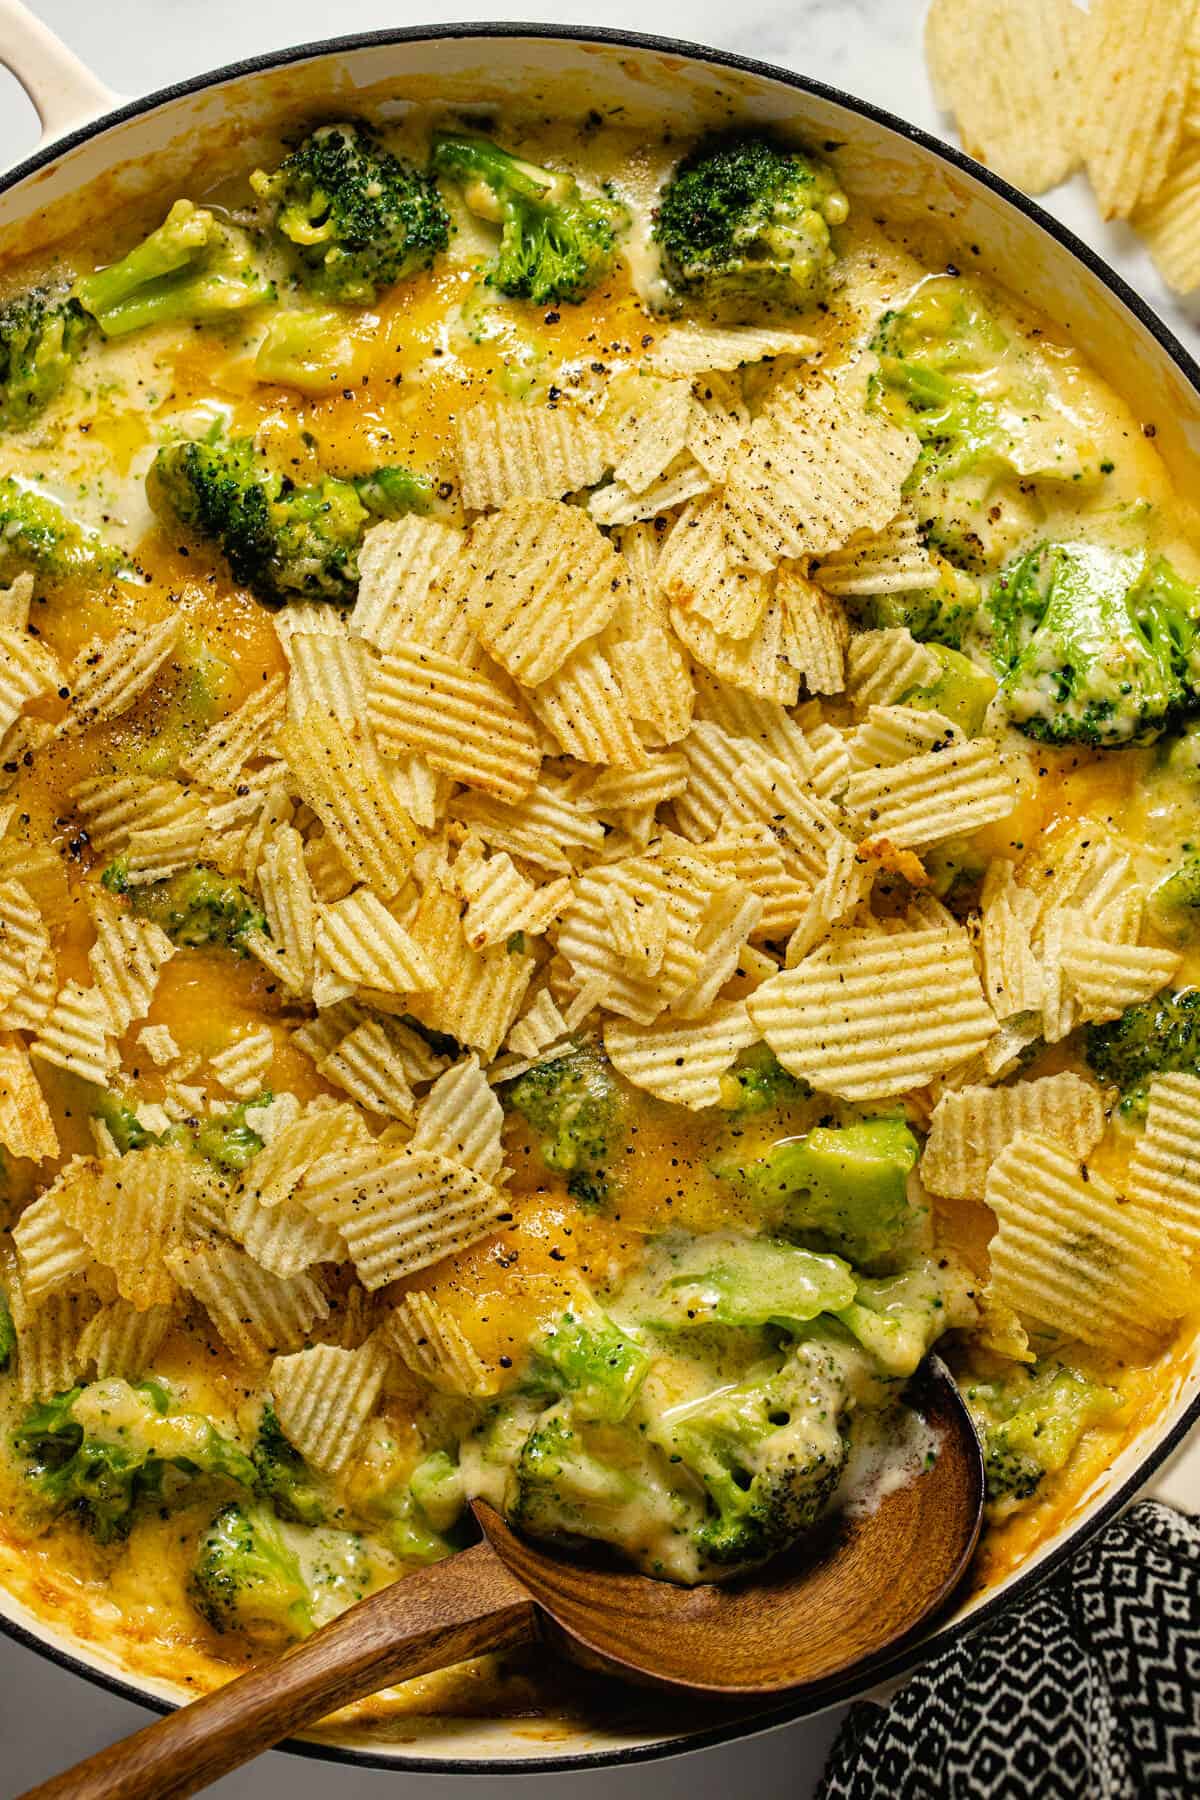 Overhead shot of a large white pan filled with broccoli cheese casserole topped with potato chips